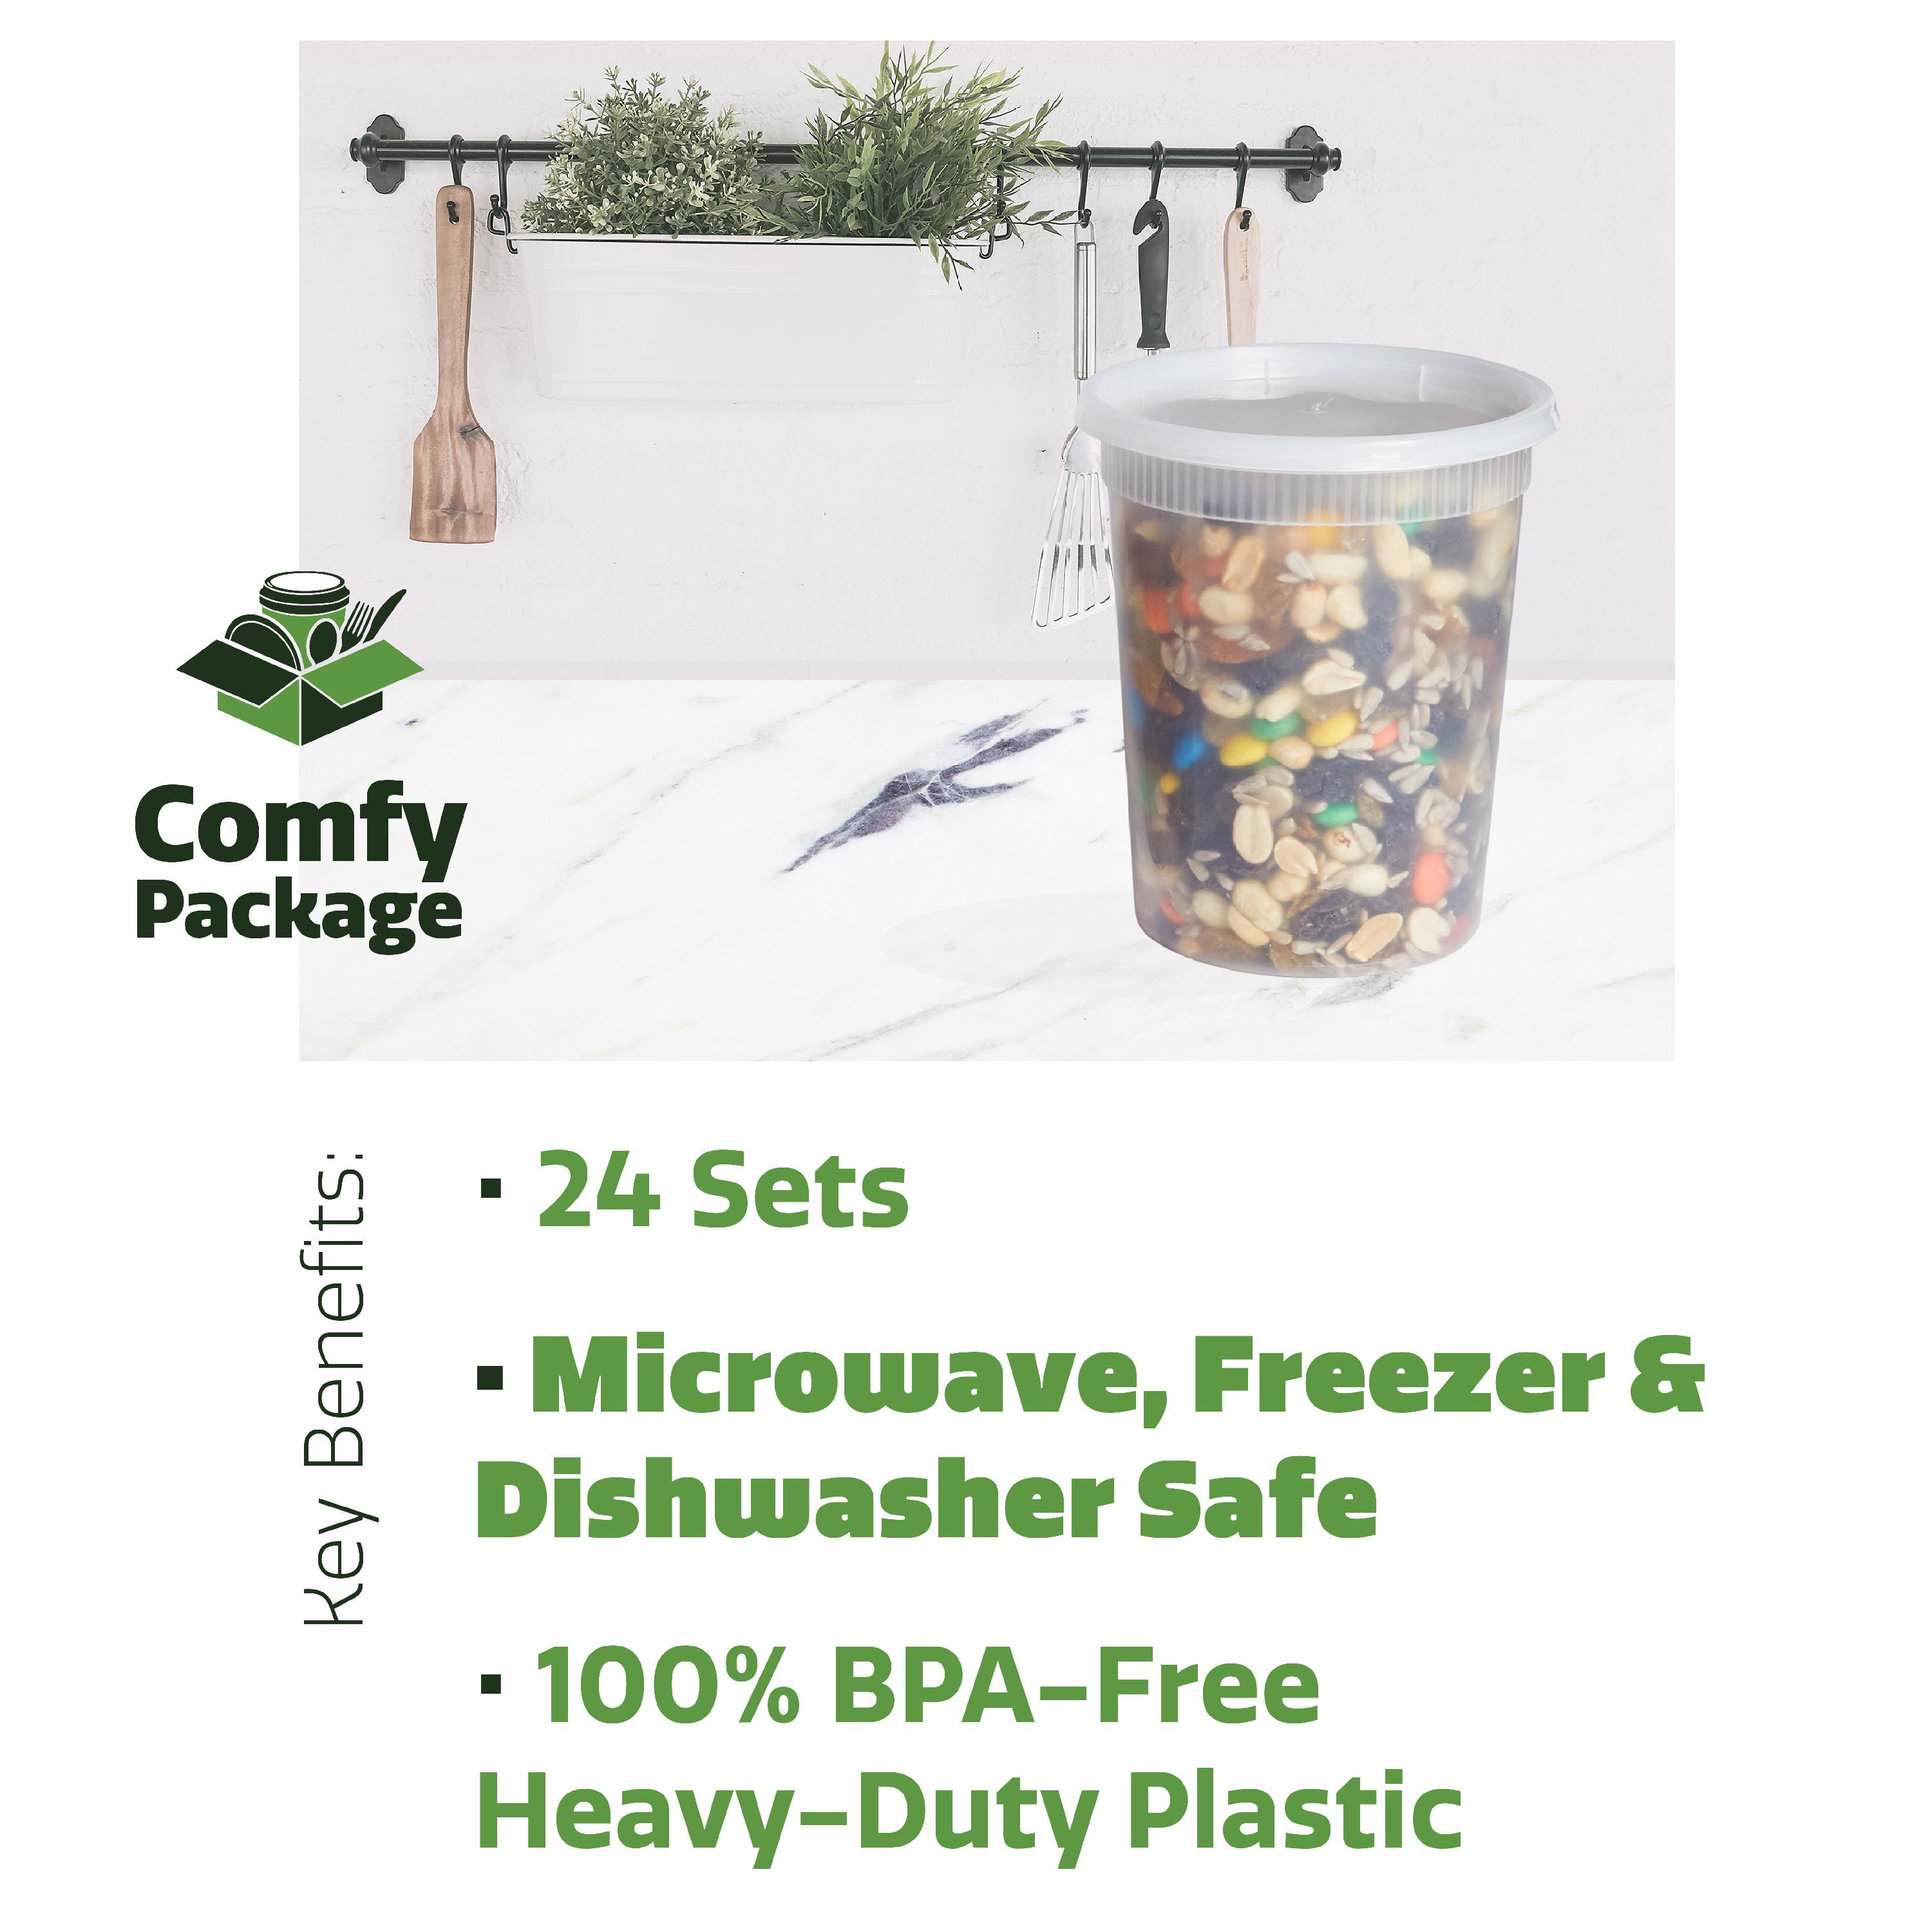 Conair™ Waring™ Extra-Large-Capacity Container for Blender